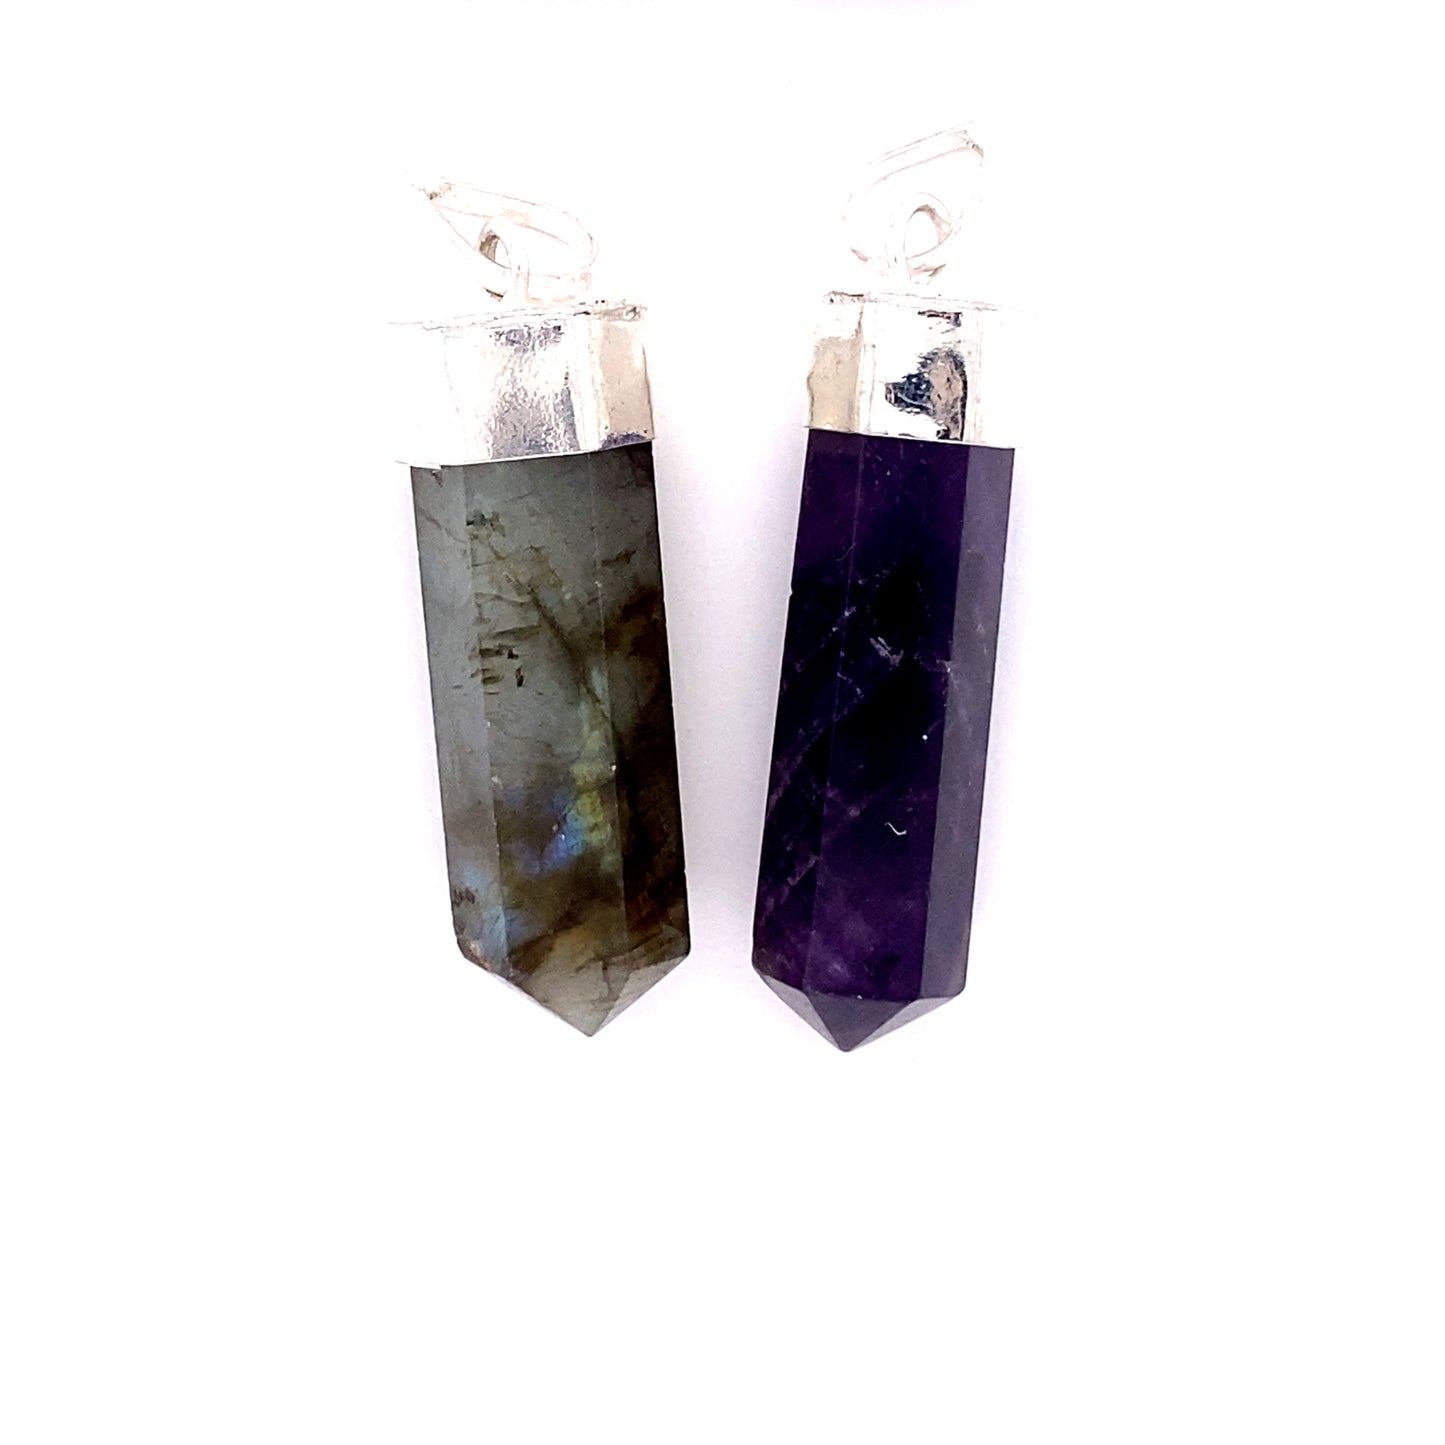 Super Silver's Simple Gemstone Point Pendant with Labradorite and amethyst, giving off a boho vibe.